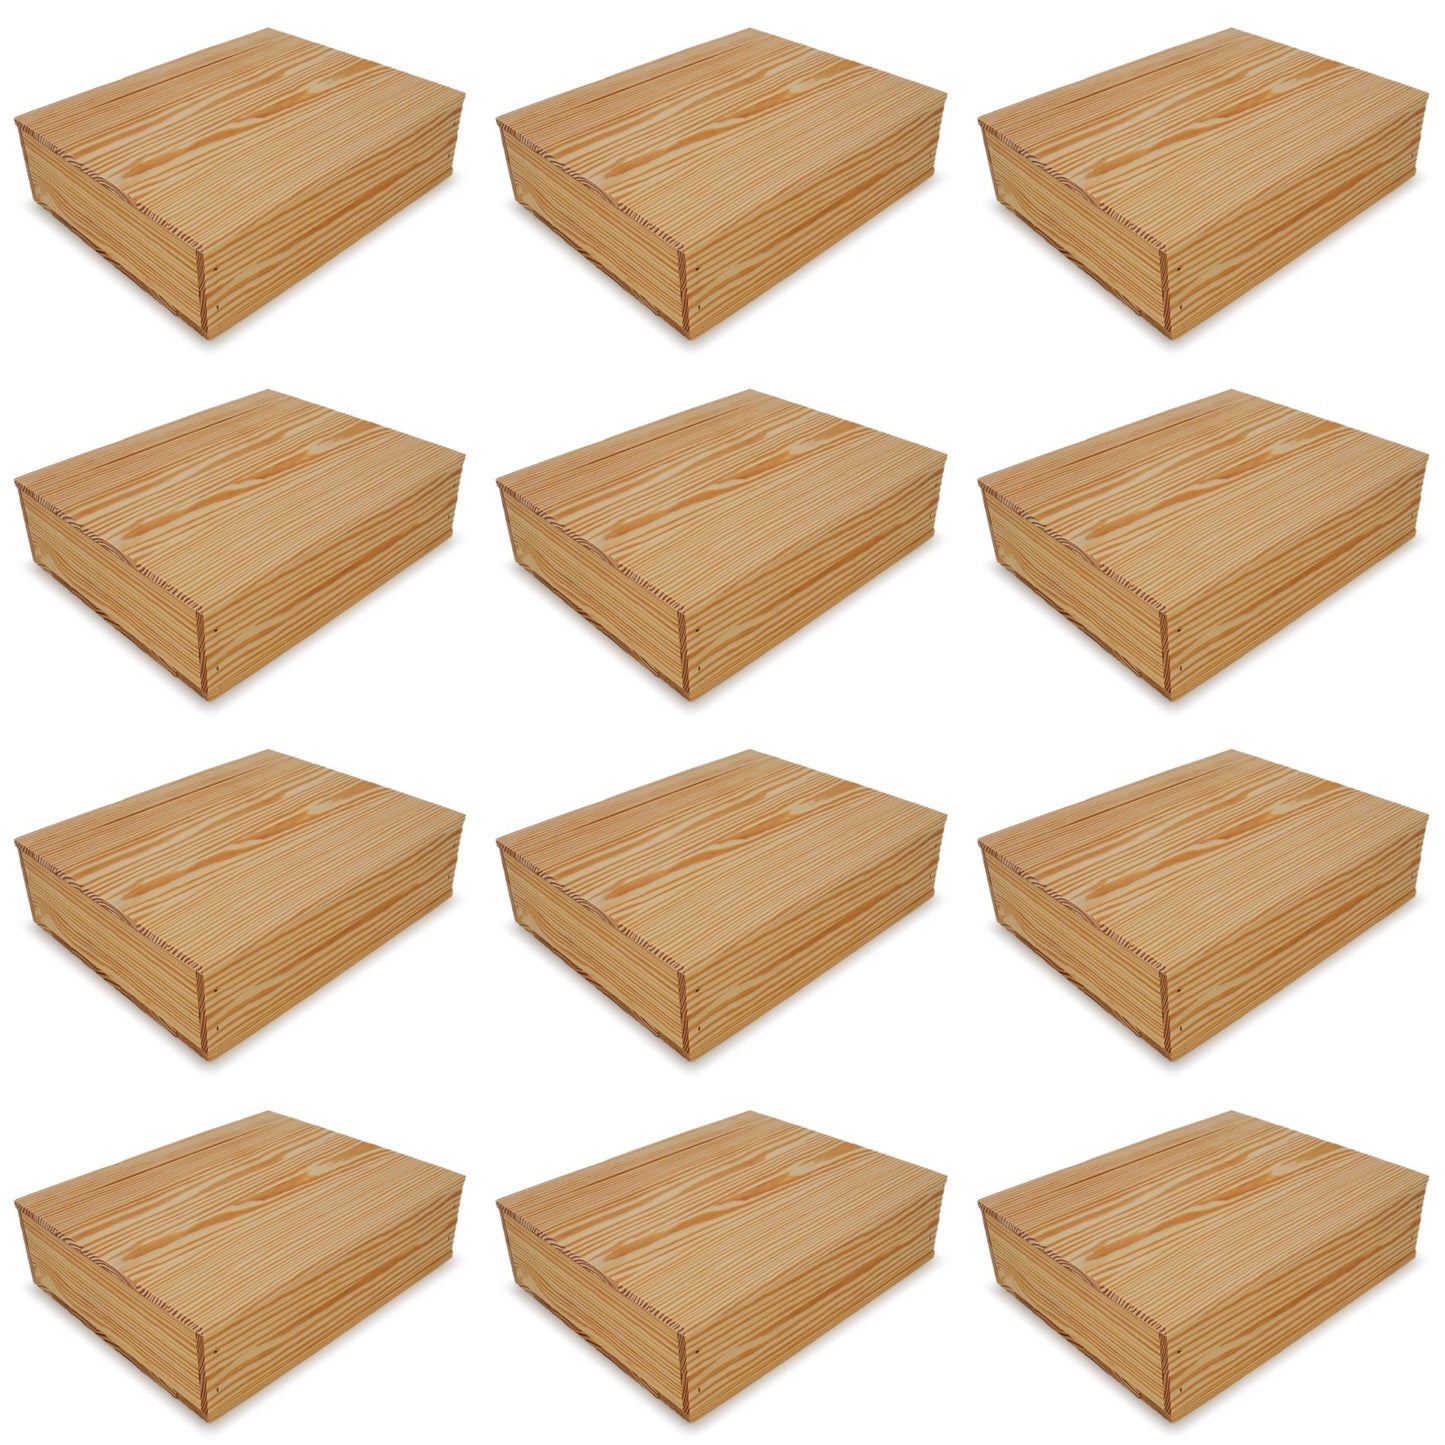 12 Small wooden crates with lid 14x11.5x3.5